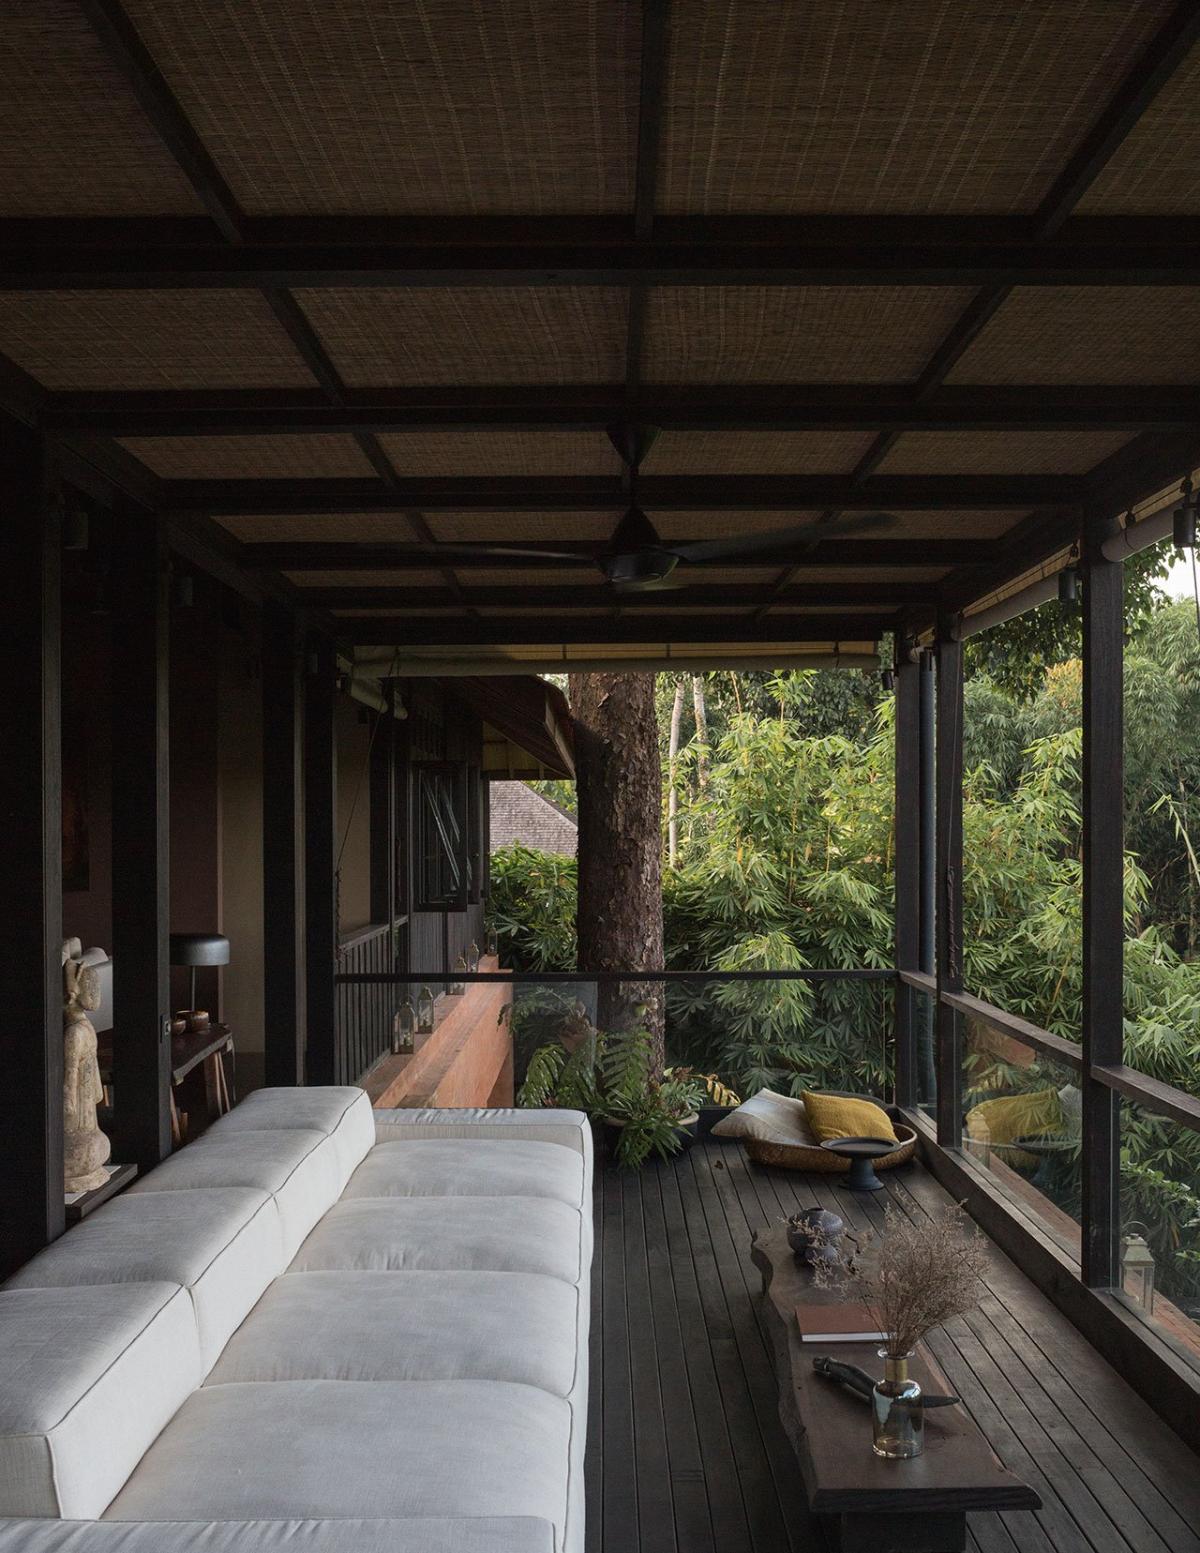 Earthy Luxury: Traditional Balinese Longhouse Transformed to a Boutique Villa